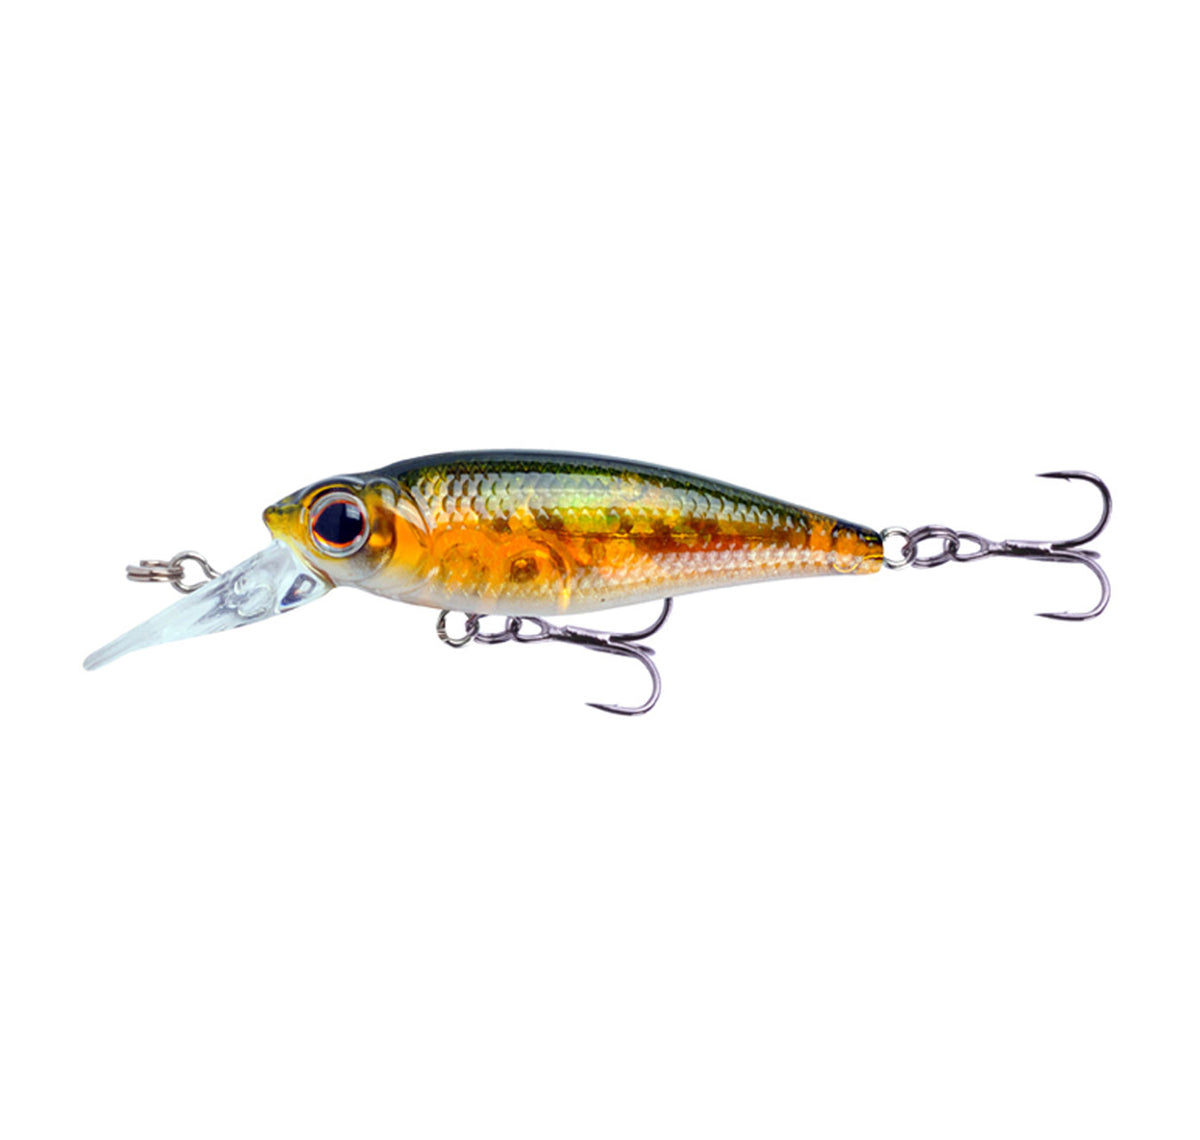 Cultiva Mira Shad 4g 50mm Lures